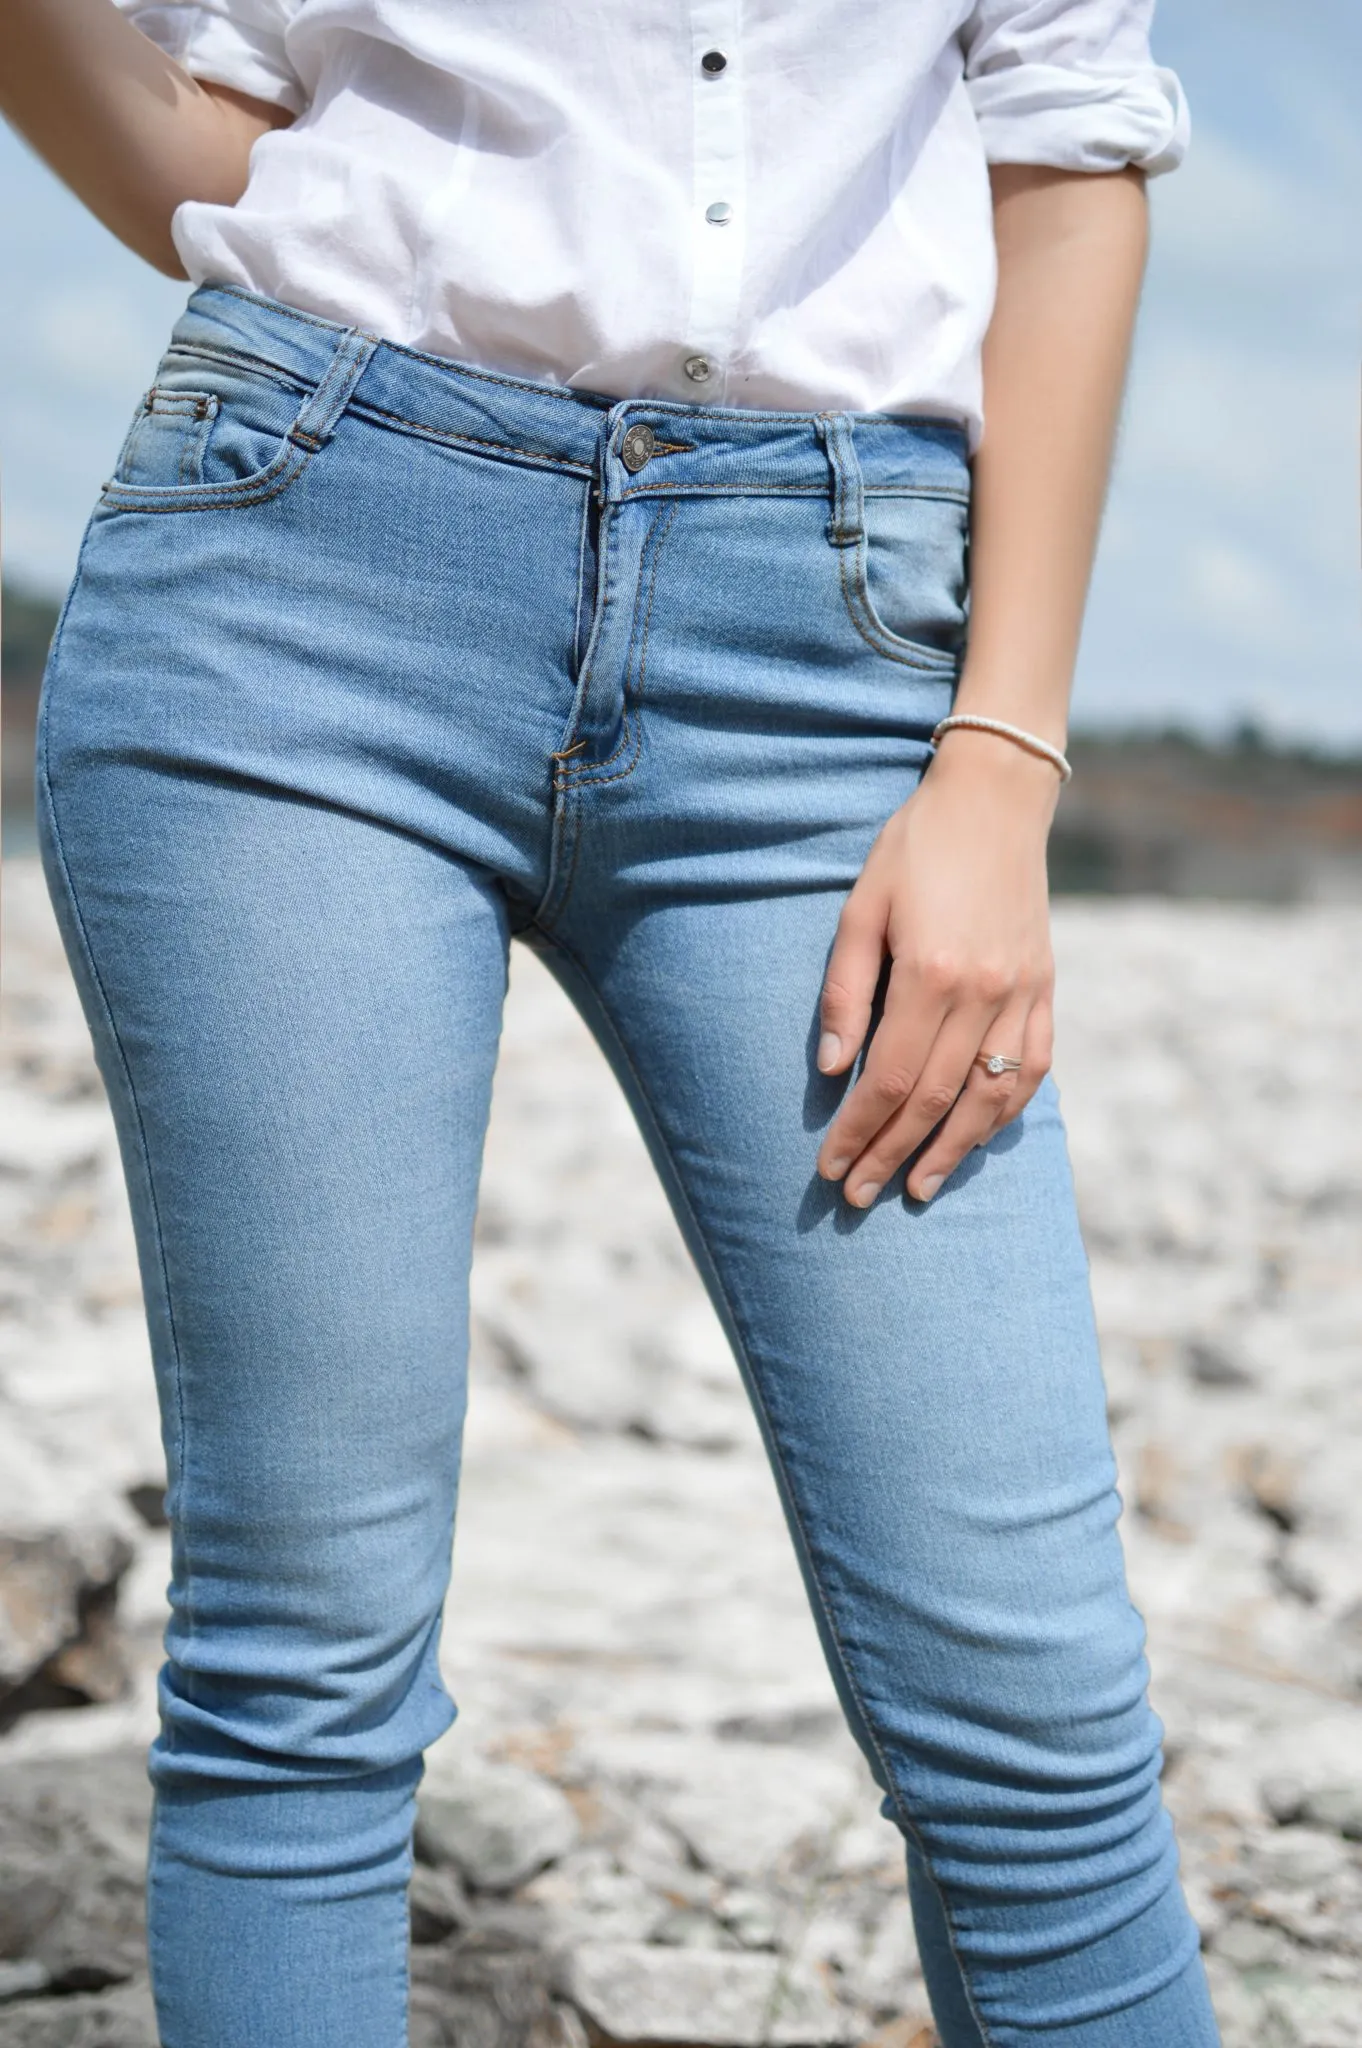 Back pain and skinny jeans, do they really cause pain?